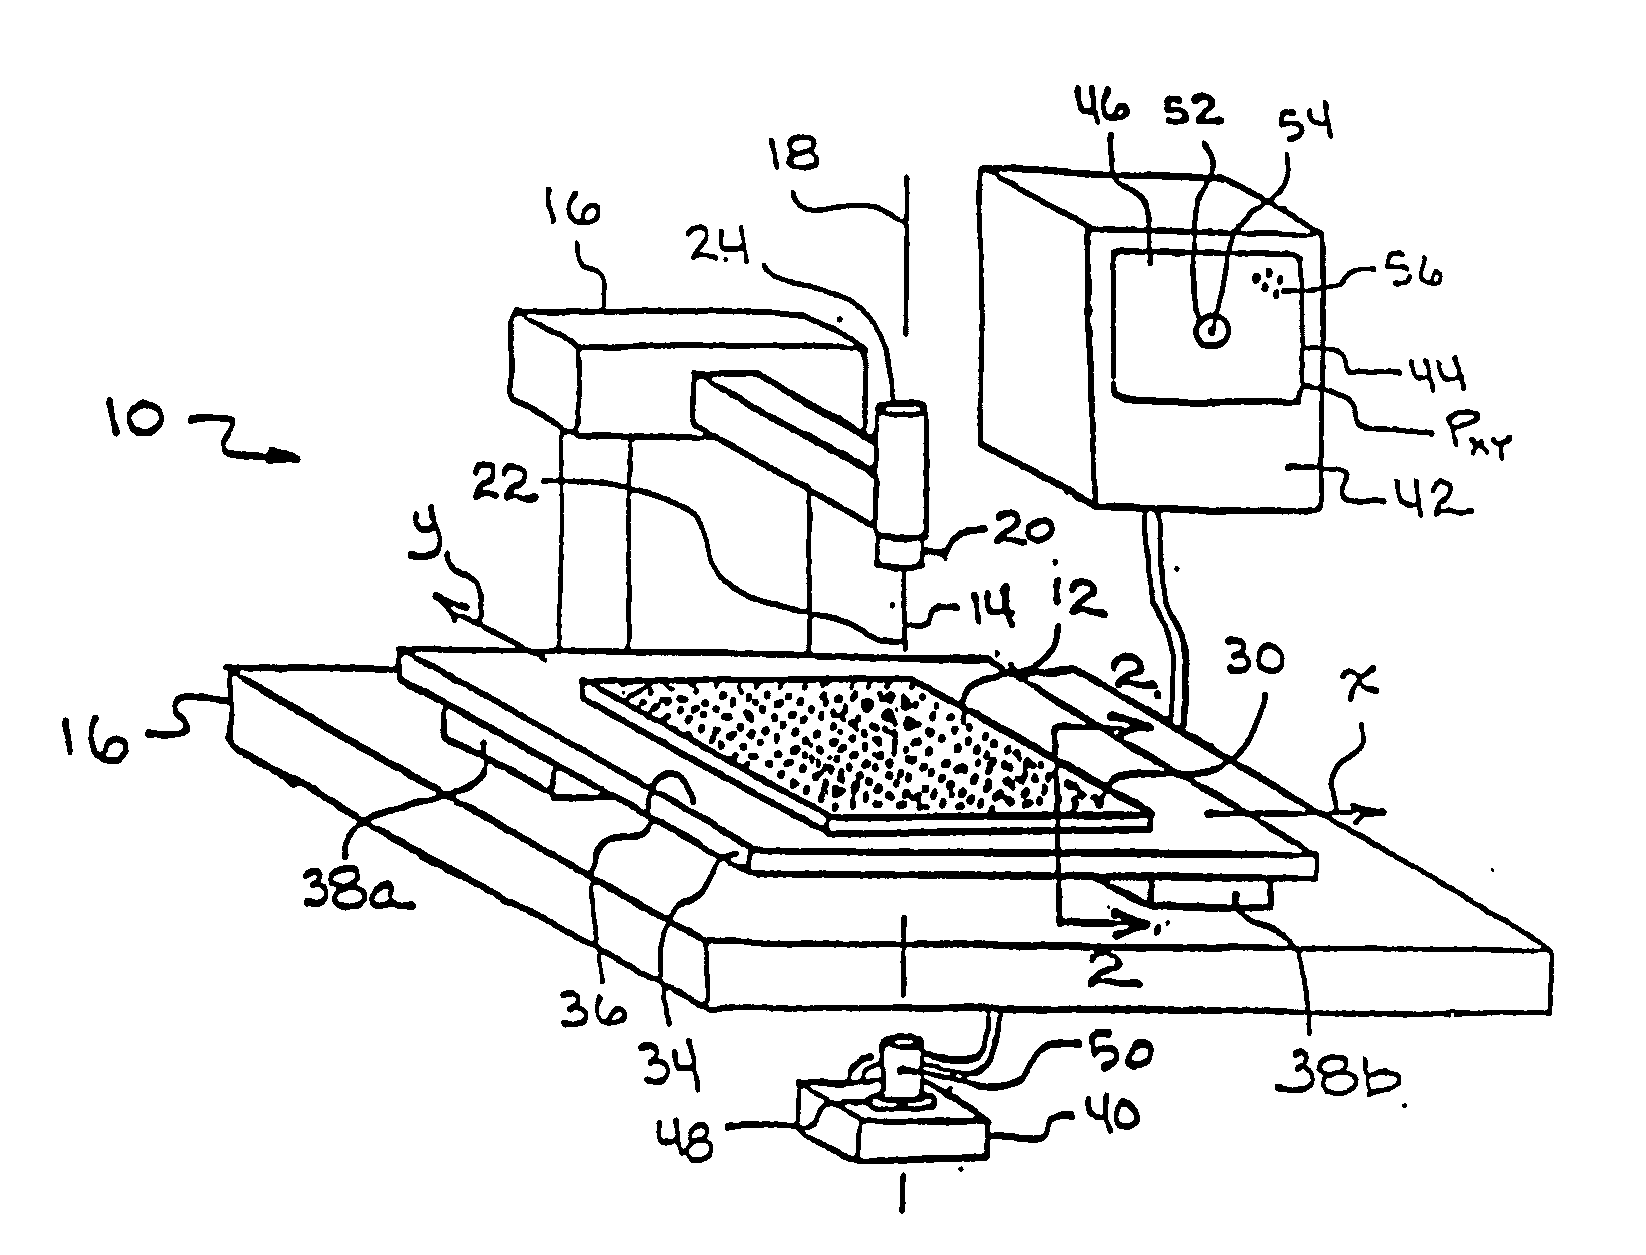 Positioning system for moving a selected station of a holding plate to a predetermined location for interaction with a probe